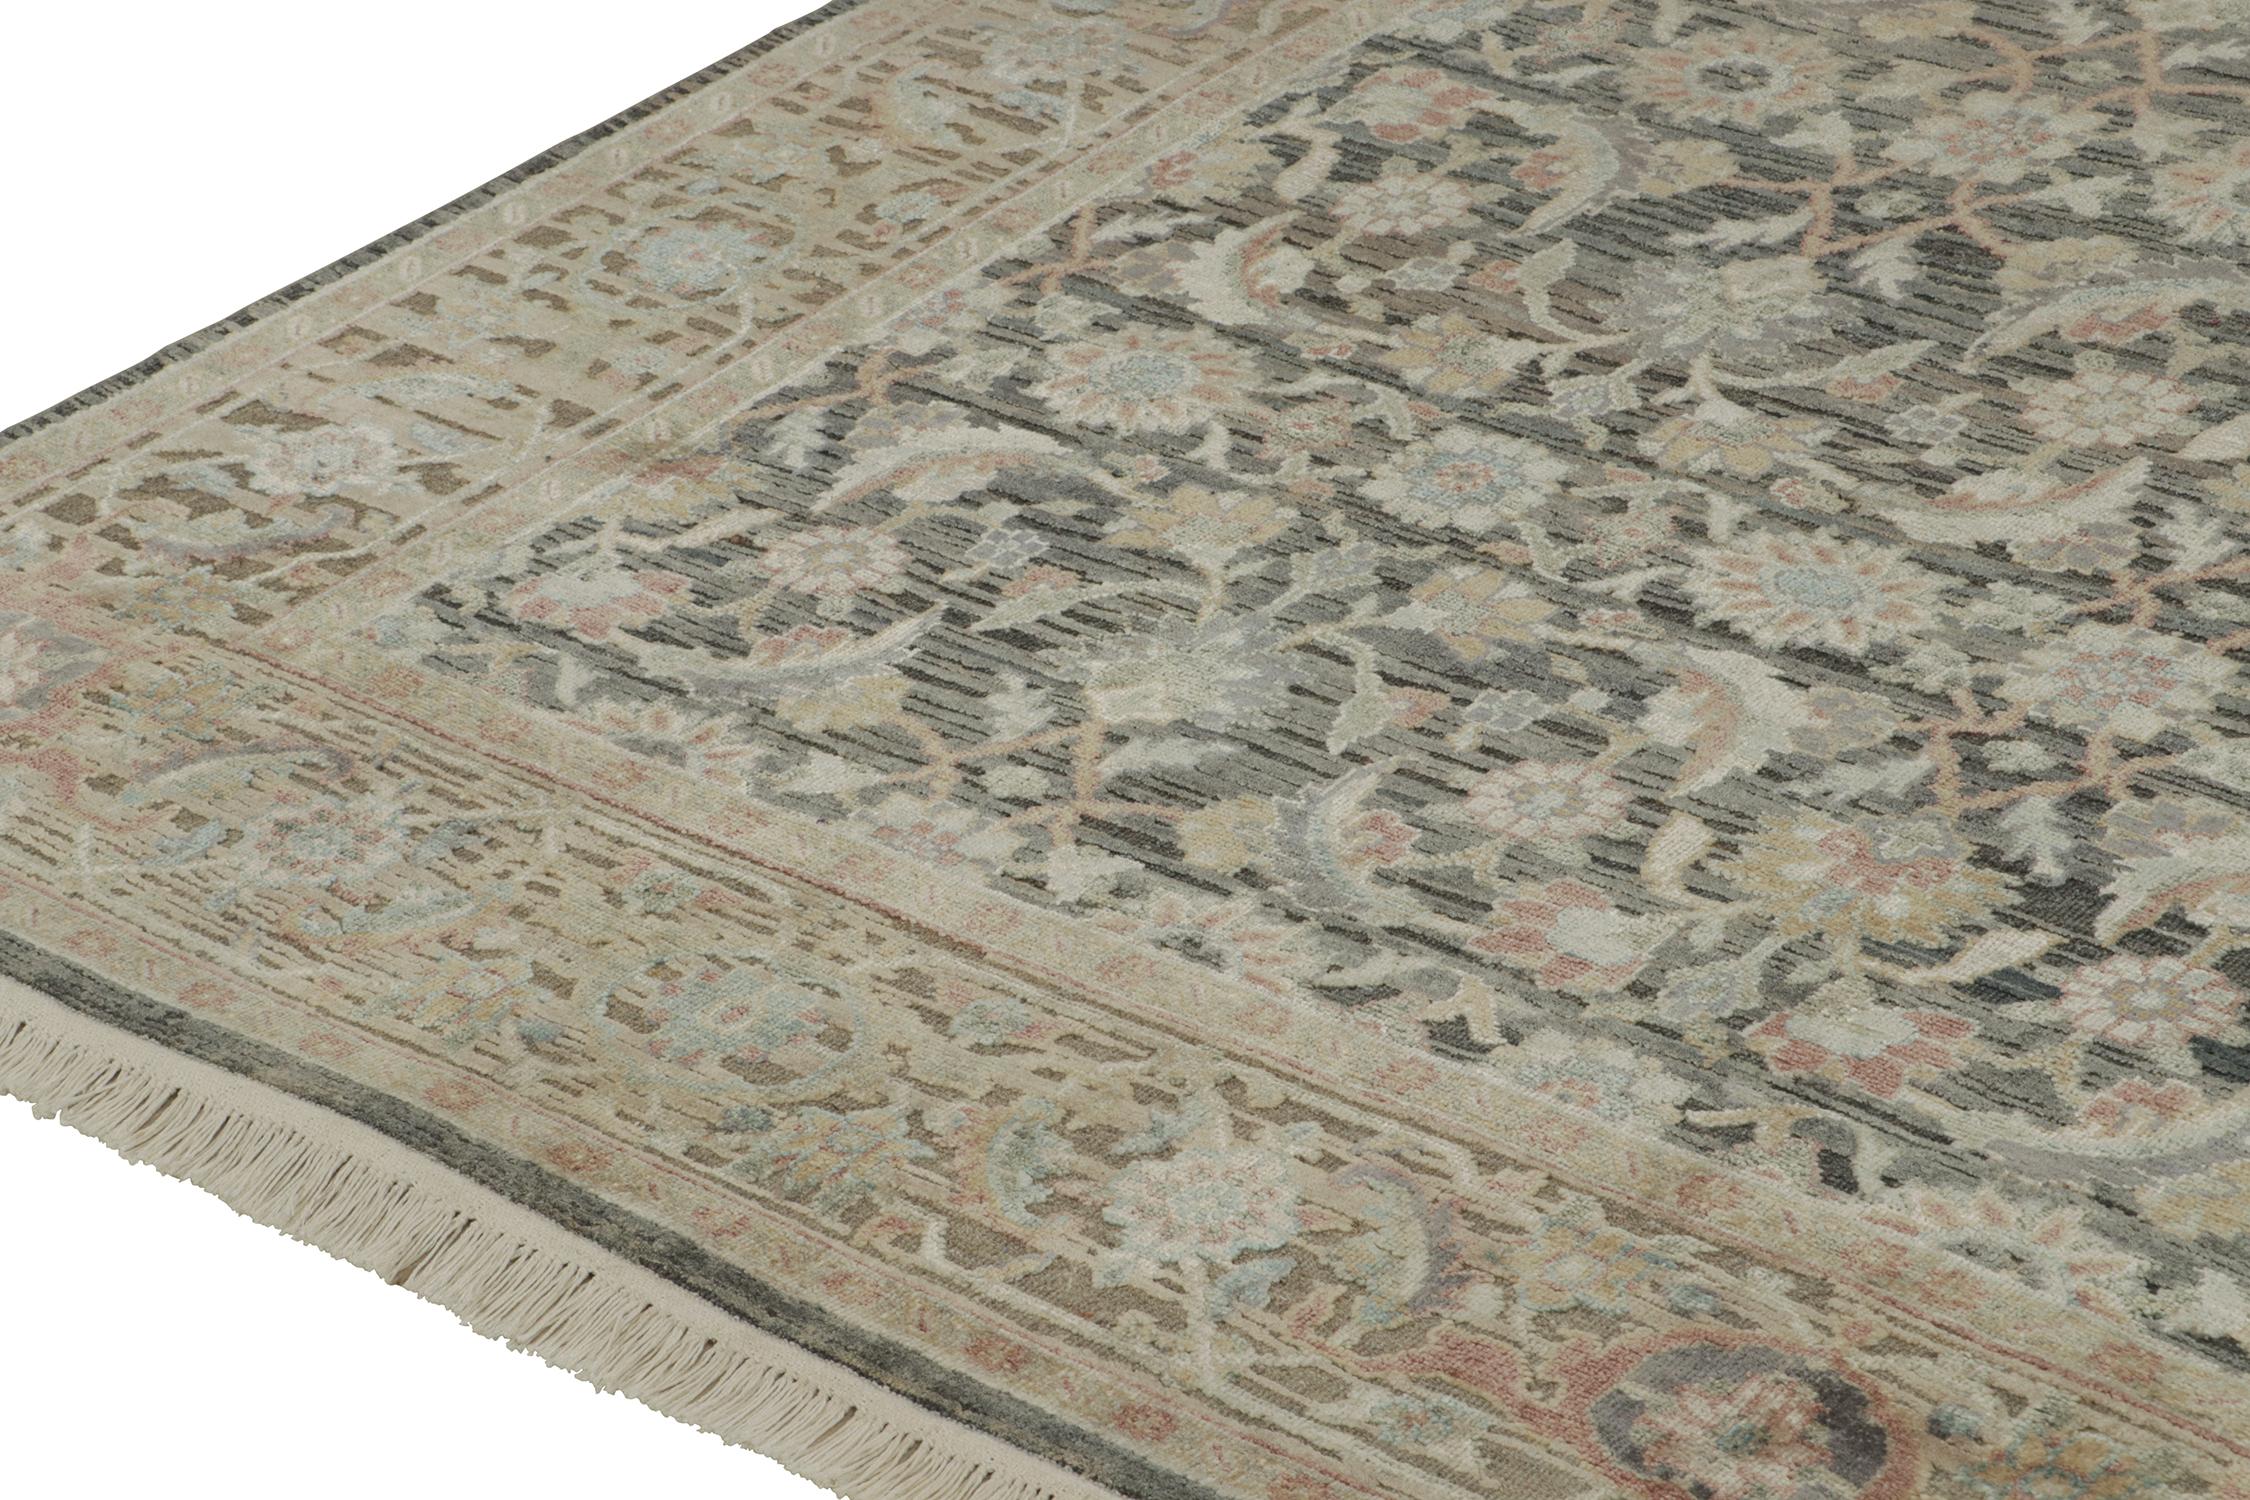 Rug & Kilim’s Herati Style Rug with Gray, Blue and Beige-Brown Floral Patterns In New Condition For Sale In Long Island City, NY